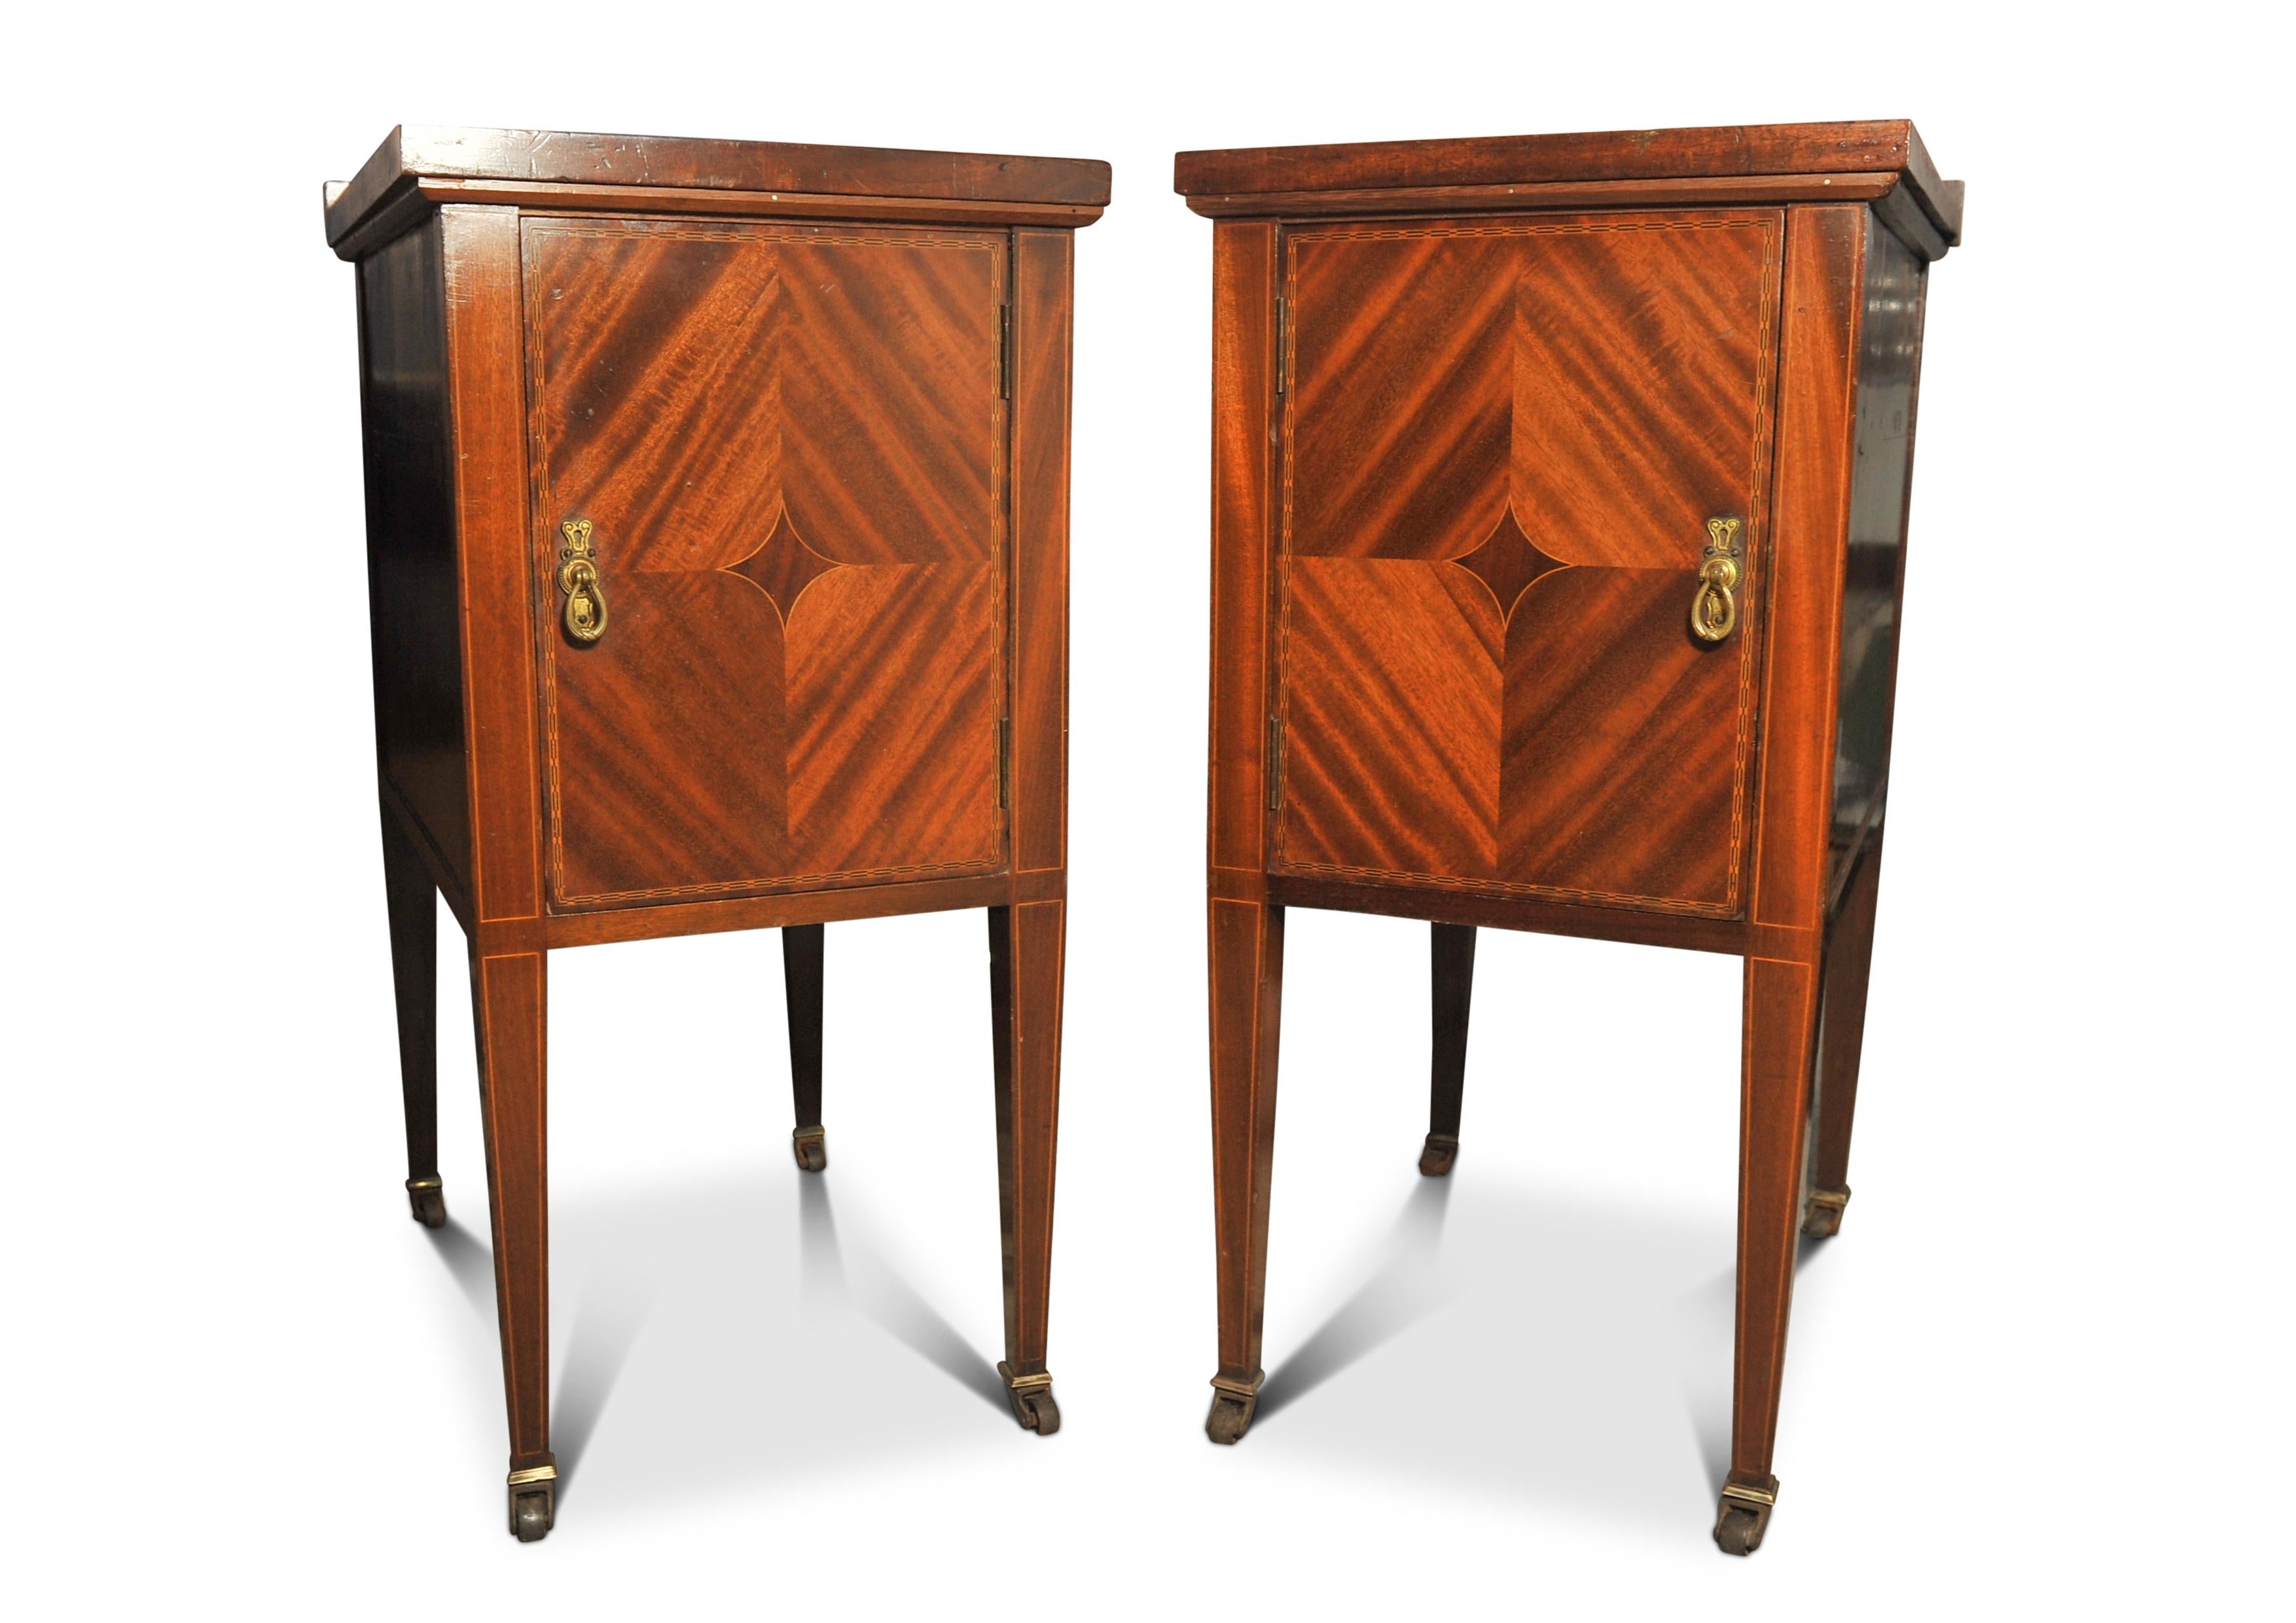 Hand-Crafted Pair of Edwardian Handcrafted Flame Mahogany Veneer Nightstands / Pot Cupboards For Sale